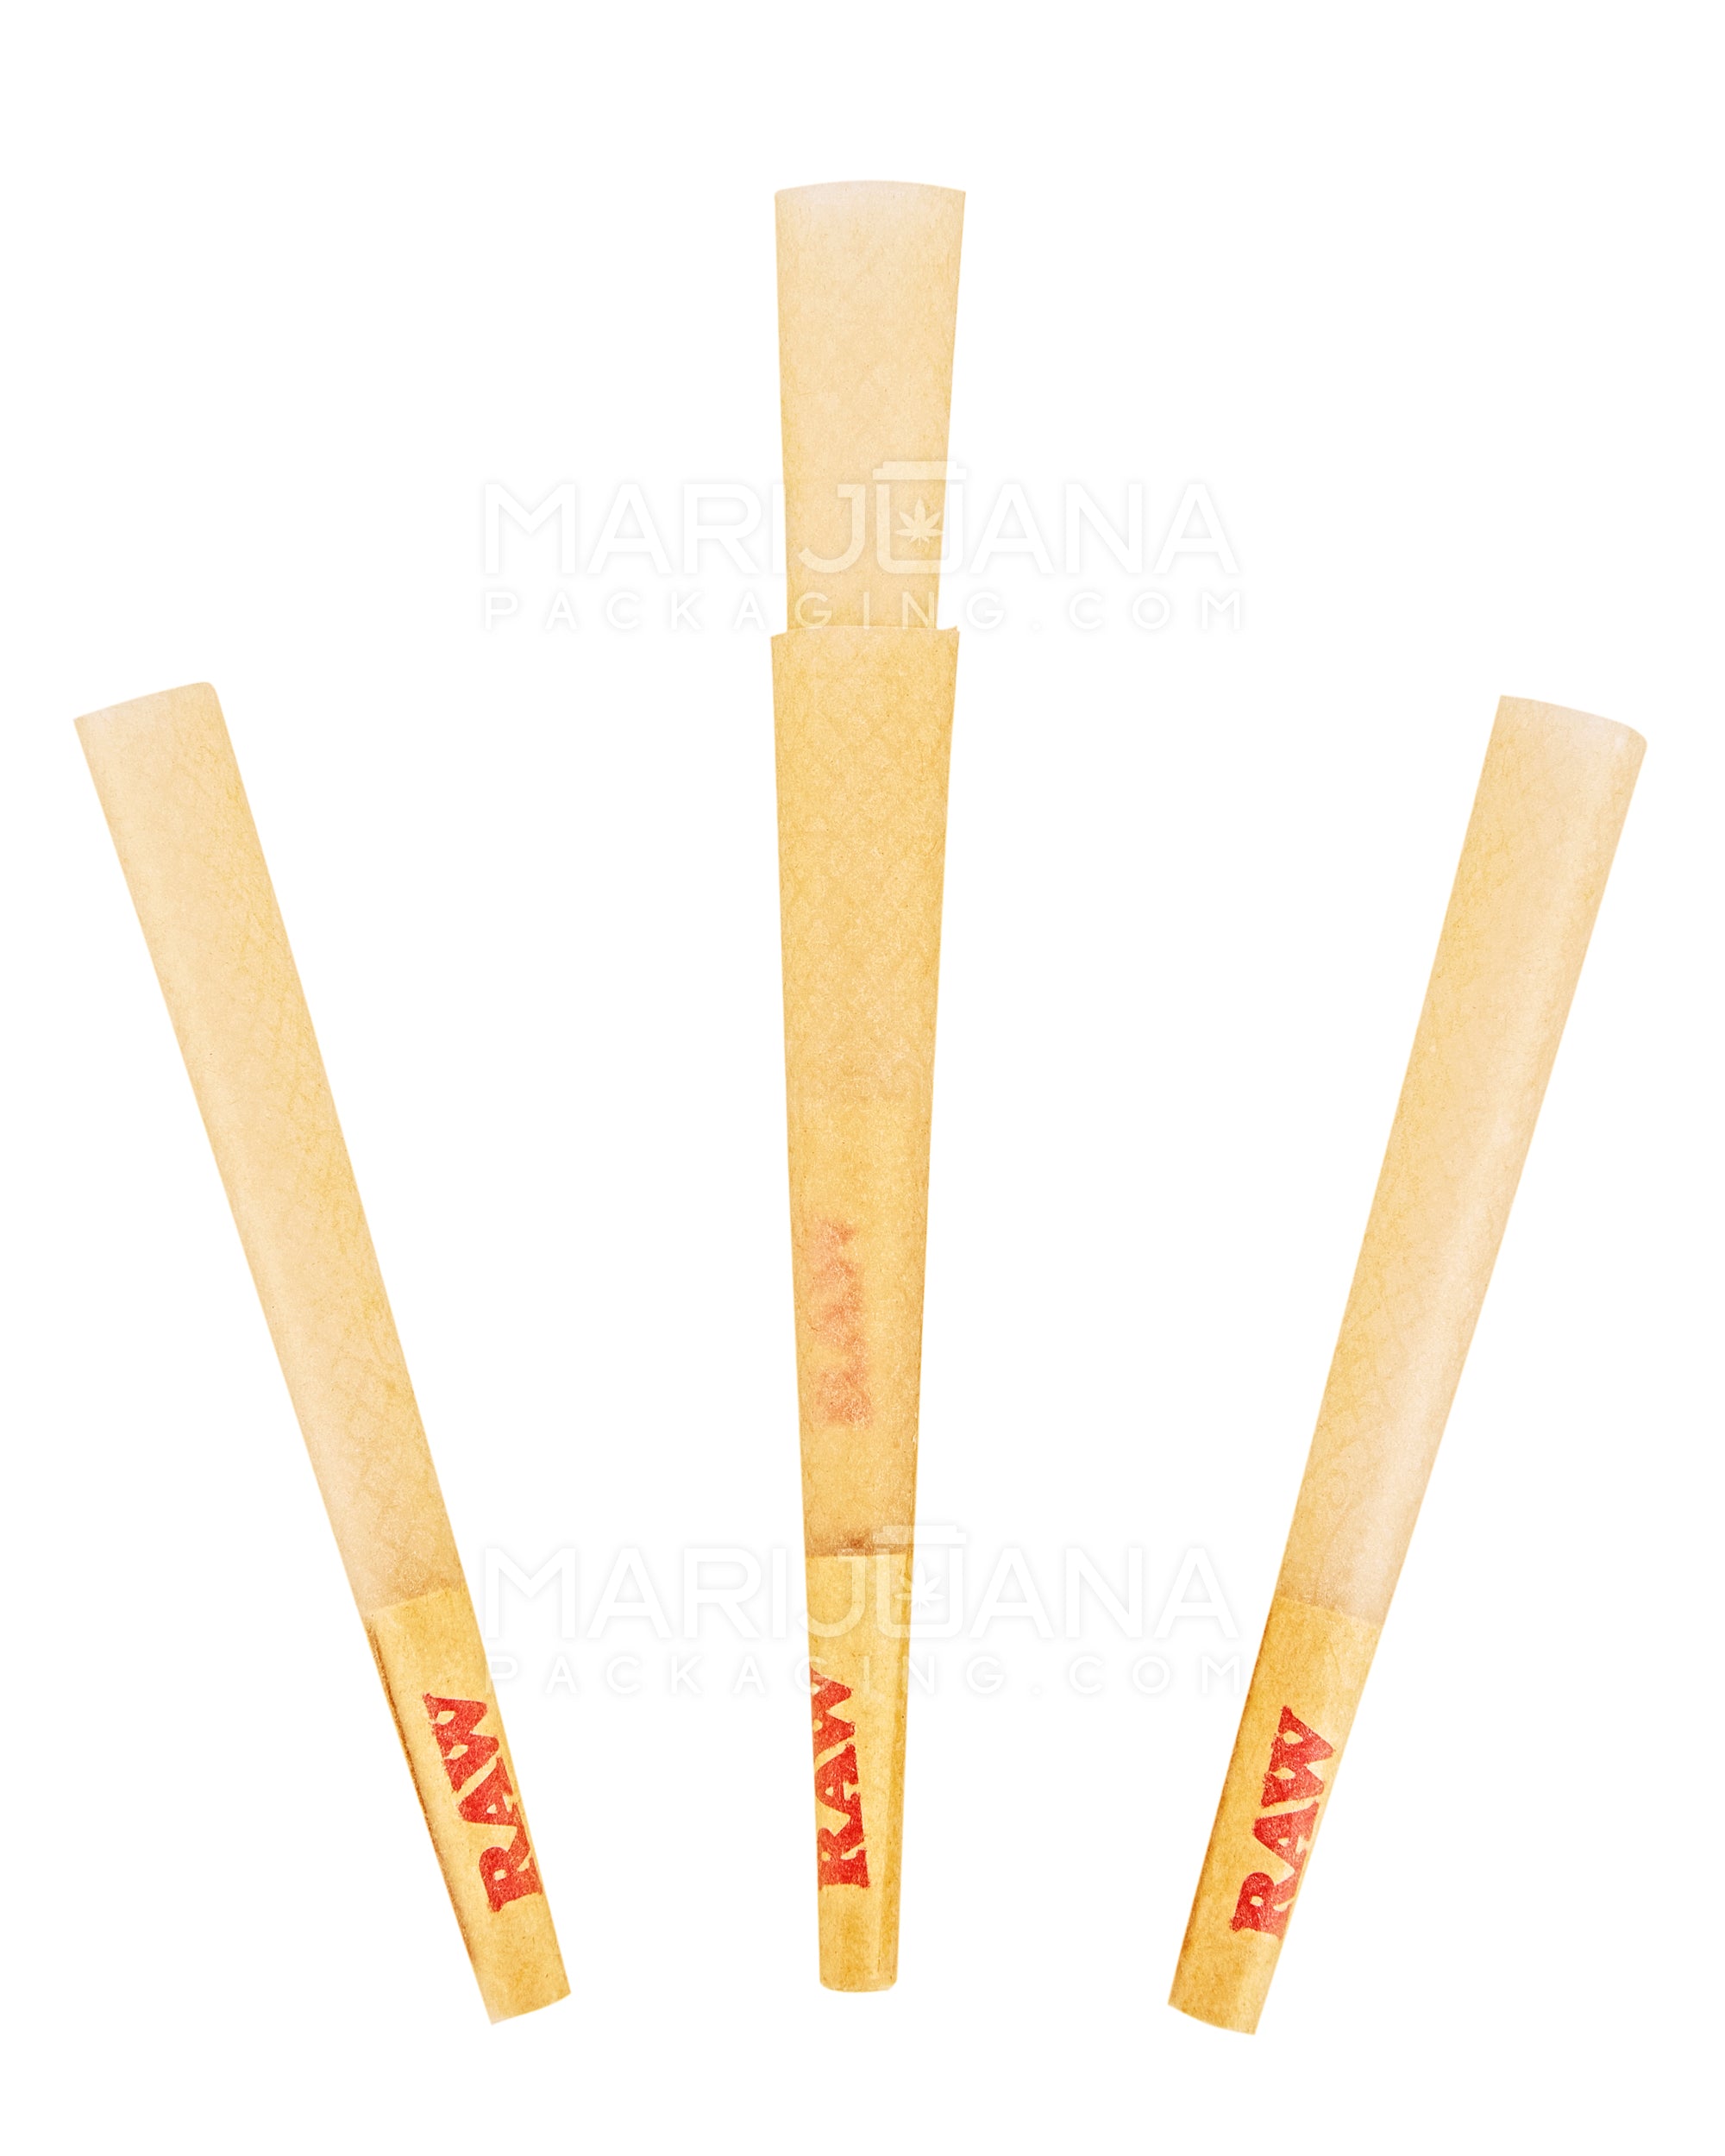 RAW | Classic 1 1/4 Size Pre-Rolled Cones | 84mm - Unbleached Paper - 900 Count - 3